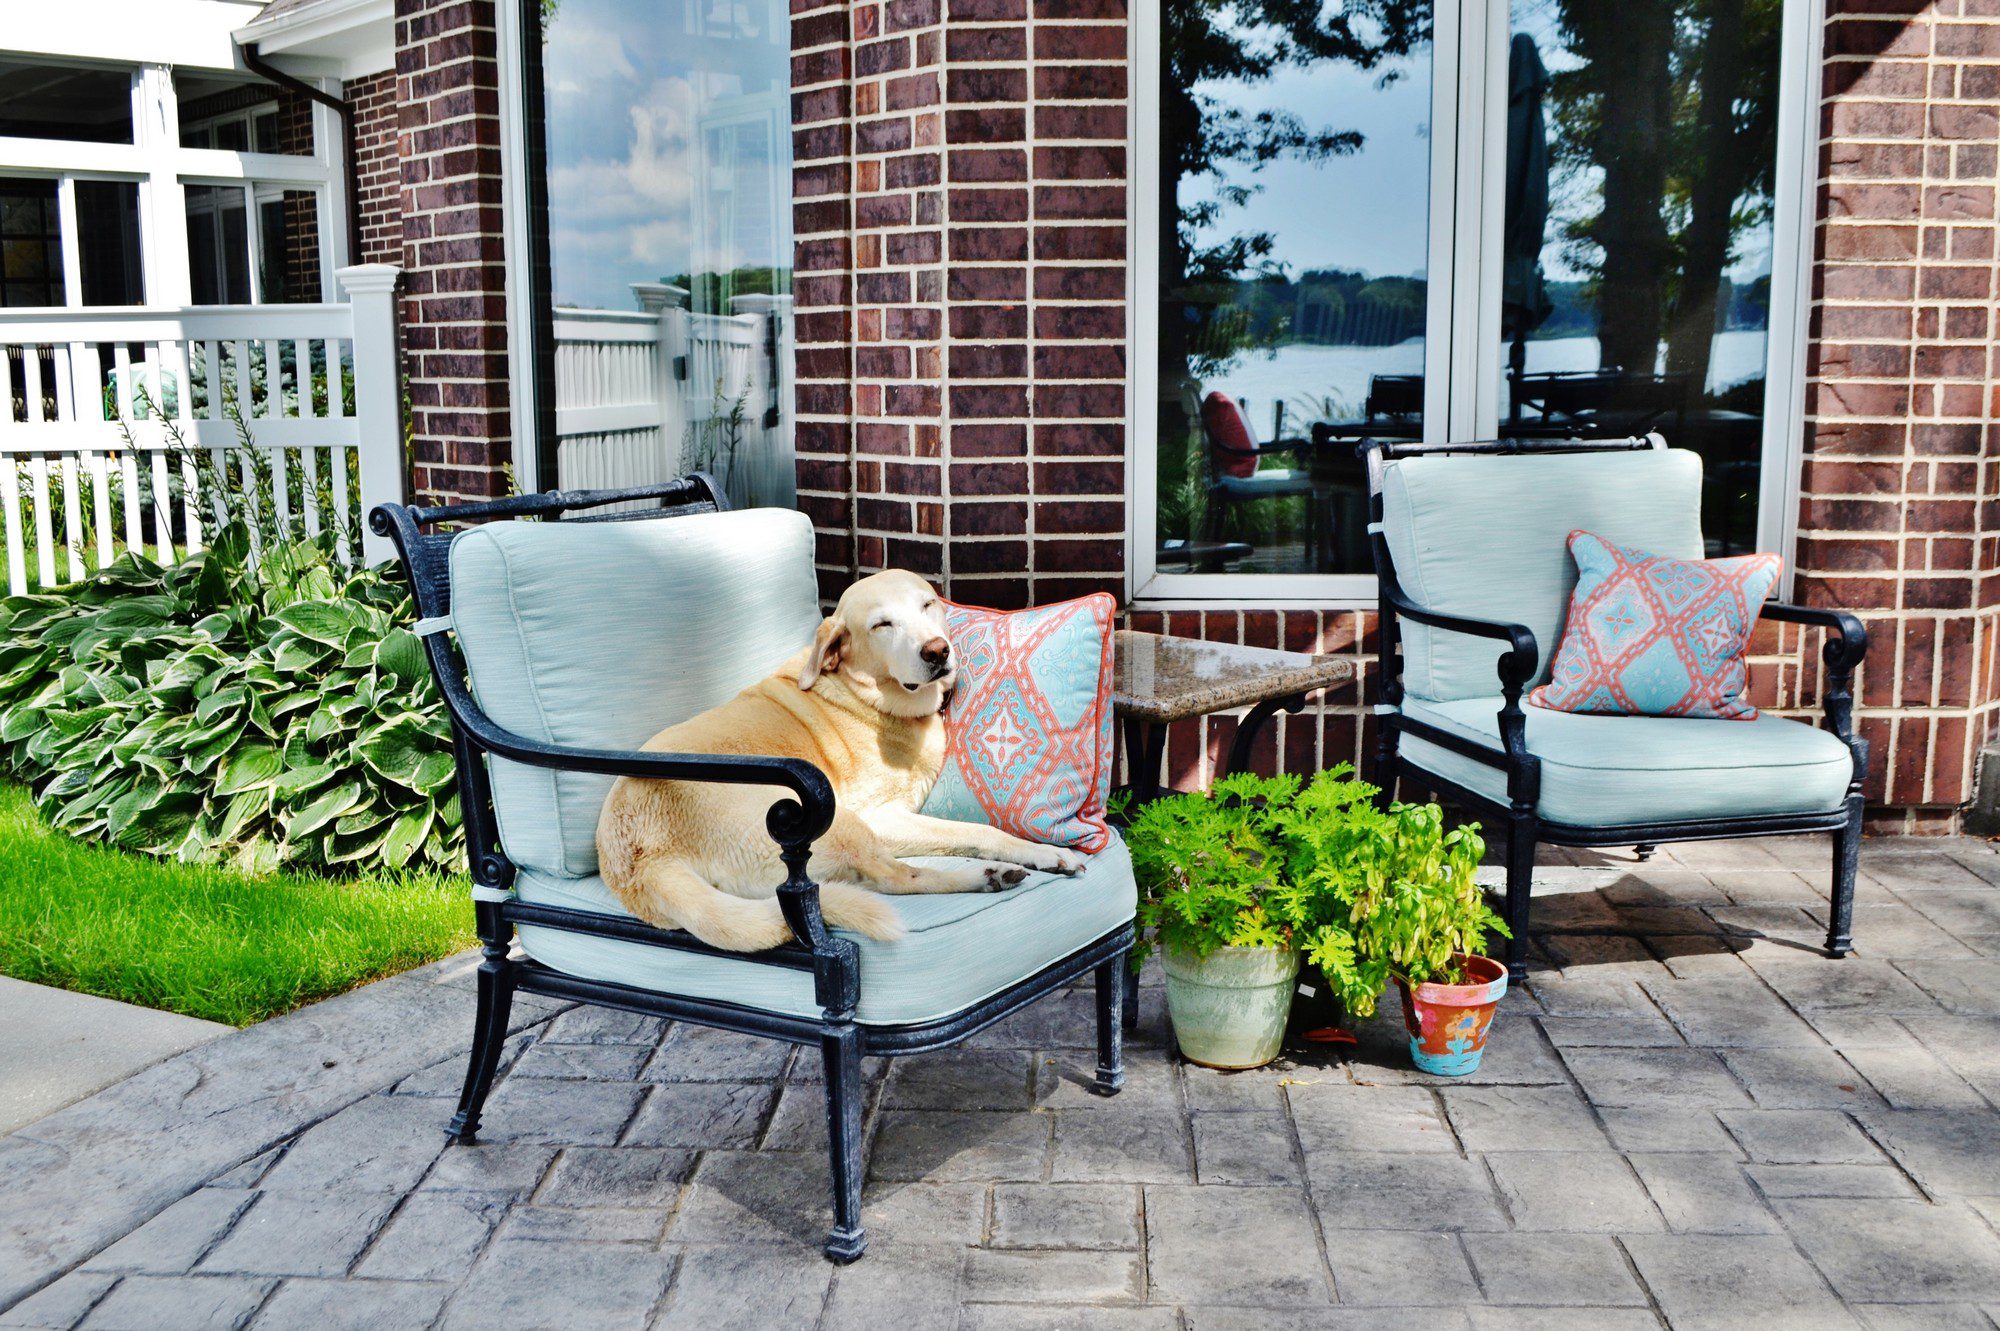 This is a sunny outdoor scene featuring a patio area outside a house with brick walls and large windows. There are two metal-framed patio chairs with light blue cushions and matching decorative pillows. A happy-looking dog is comfortably lounging on one of the chairs, seemingly enjoying a relaxing moment. Between the chairs, there are potted plants adding a touch of greenery to the setting. The ground is covered with laid stone tiles, and the grass appears well-manicured. In the background, you can see a glimpse of a calm body of water, suggesting that this house is located near a lake or a river.